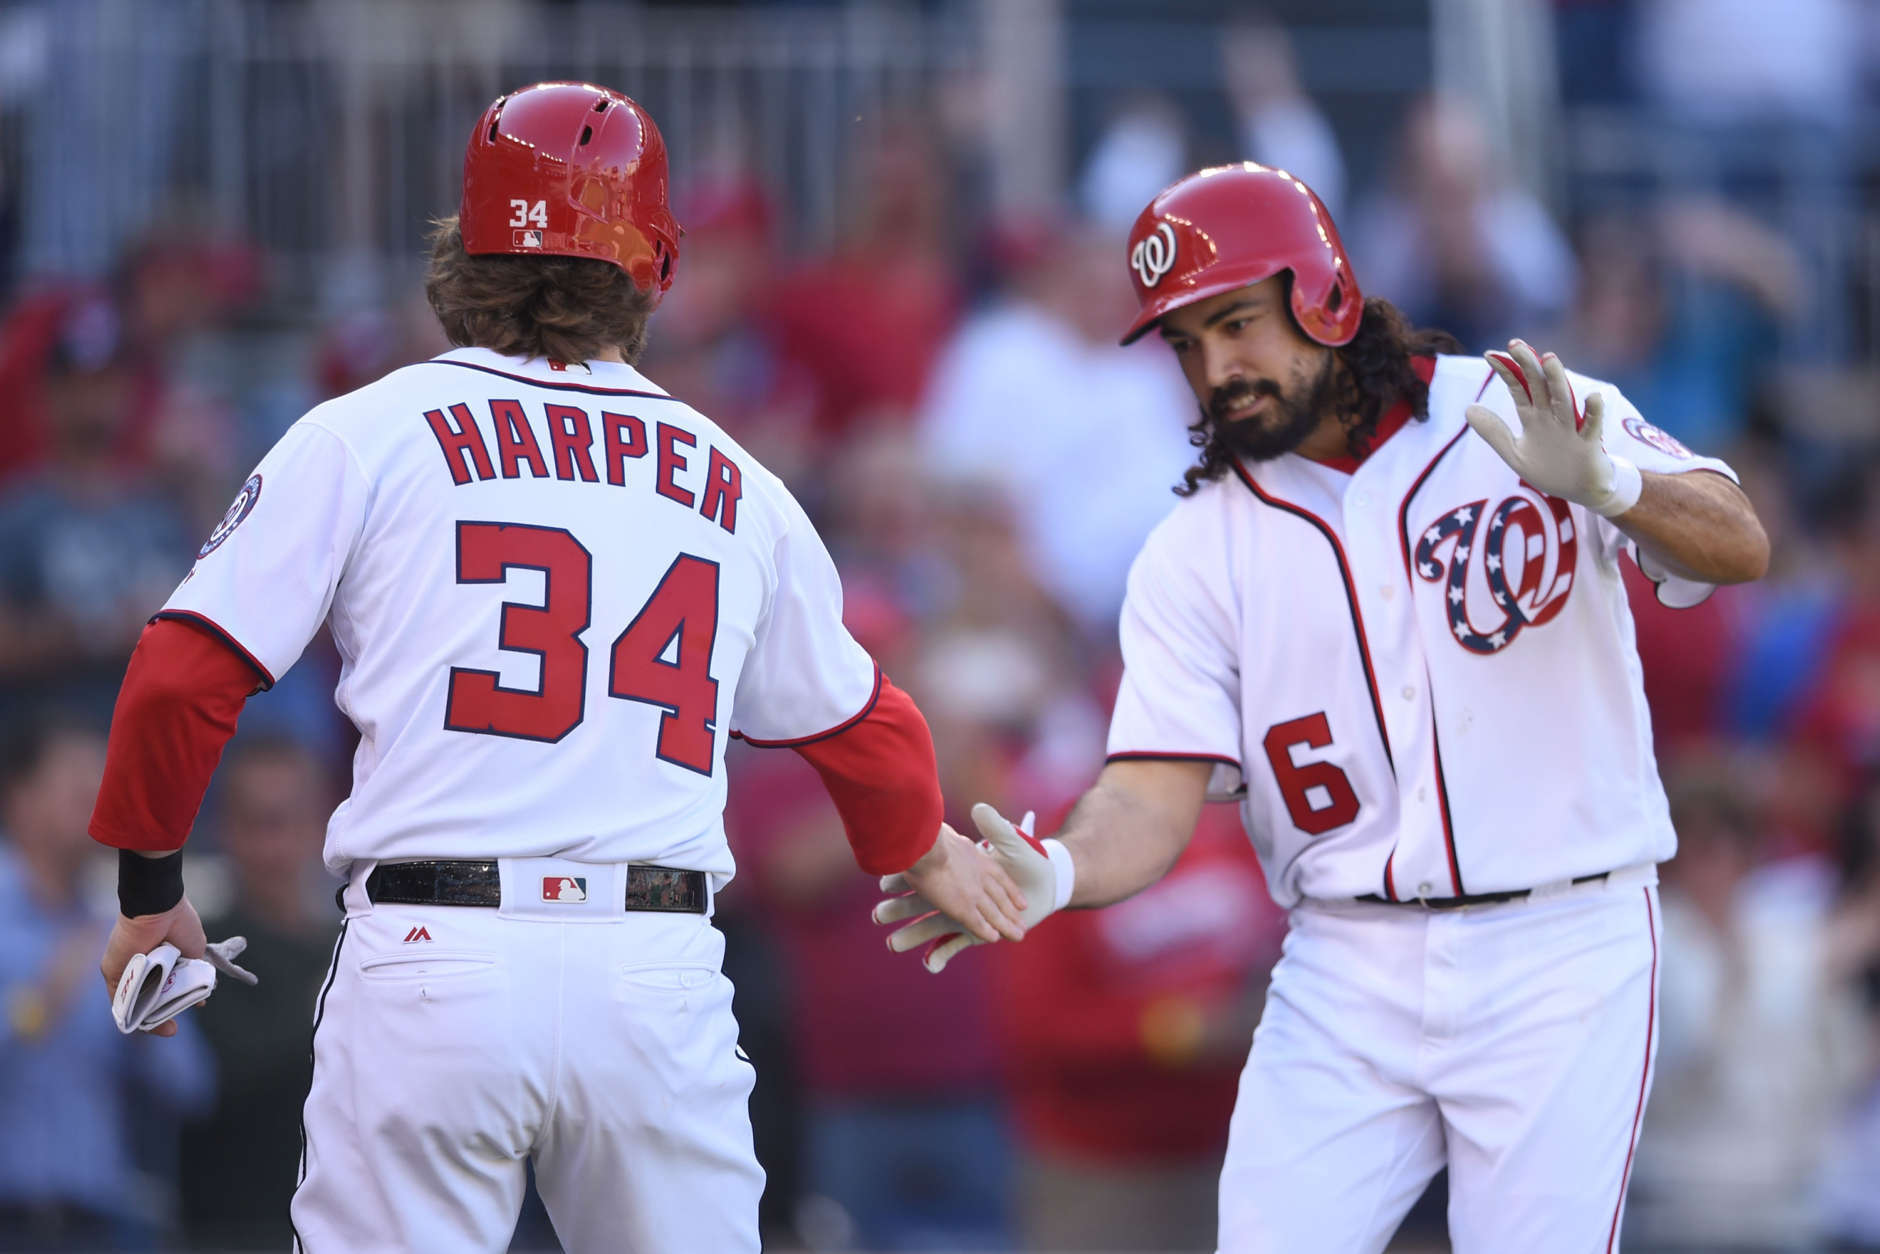 WASHINGTON, DC - OCTOBER 01:  Anthony Rendon #6 of the Washington Nationals celebrates hitting a three run home run in the first inning with Bryce Harper #34 during a baseball game against the Pittsburgh Pirates at Nationals Park on October 1, 2017 in Washington, DC.  (Photo by Mitchell Layton/Getty Images)